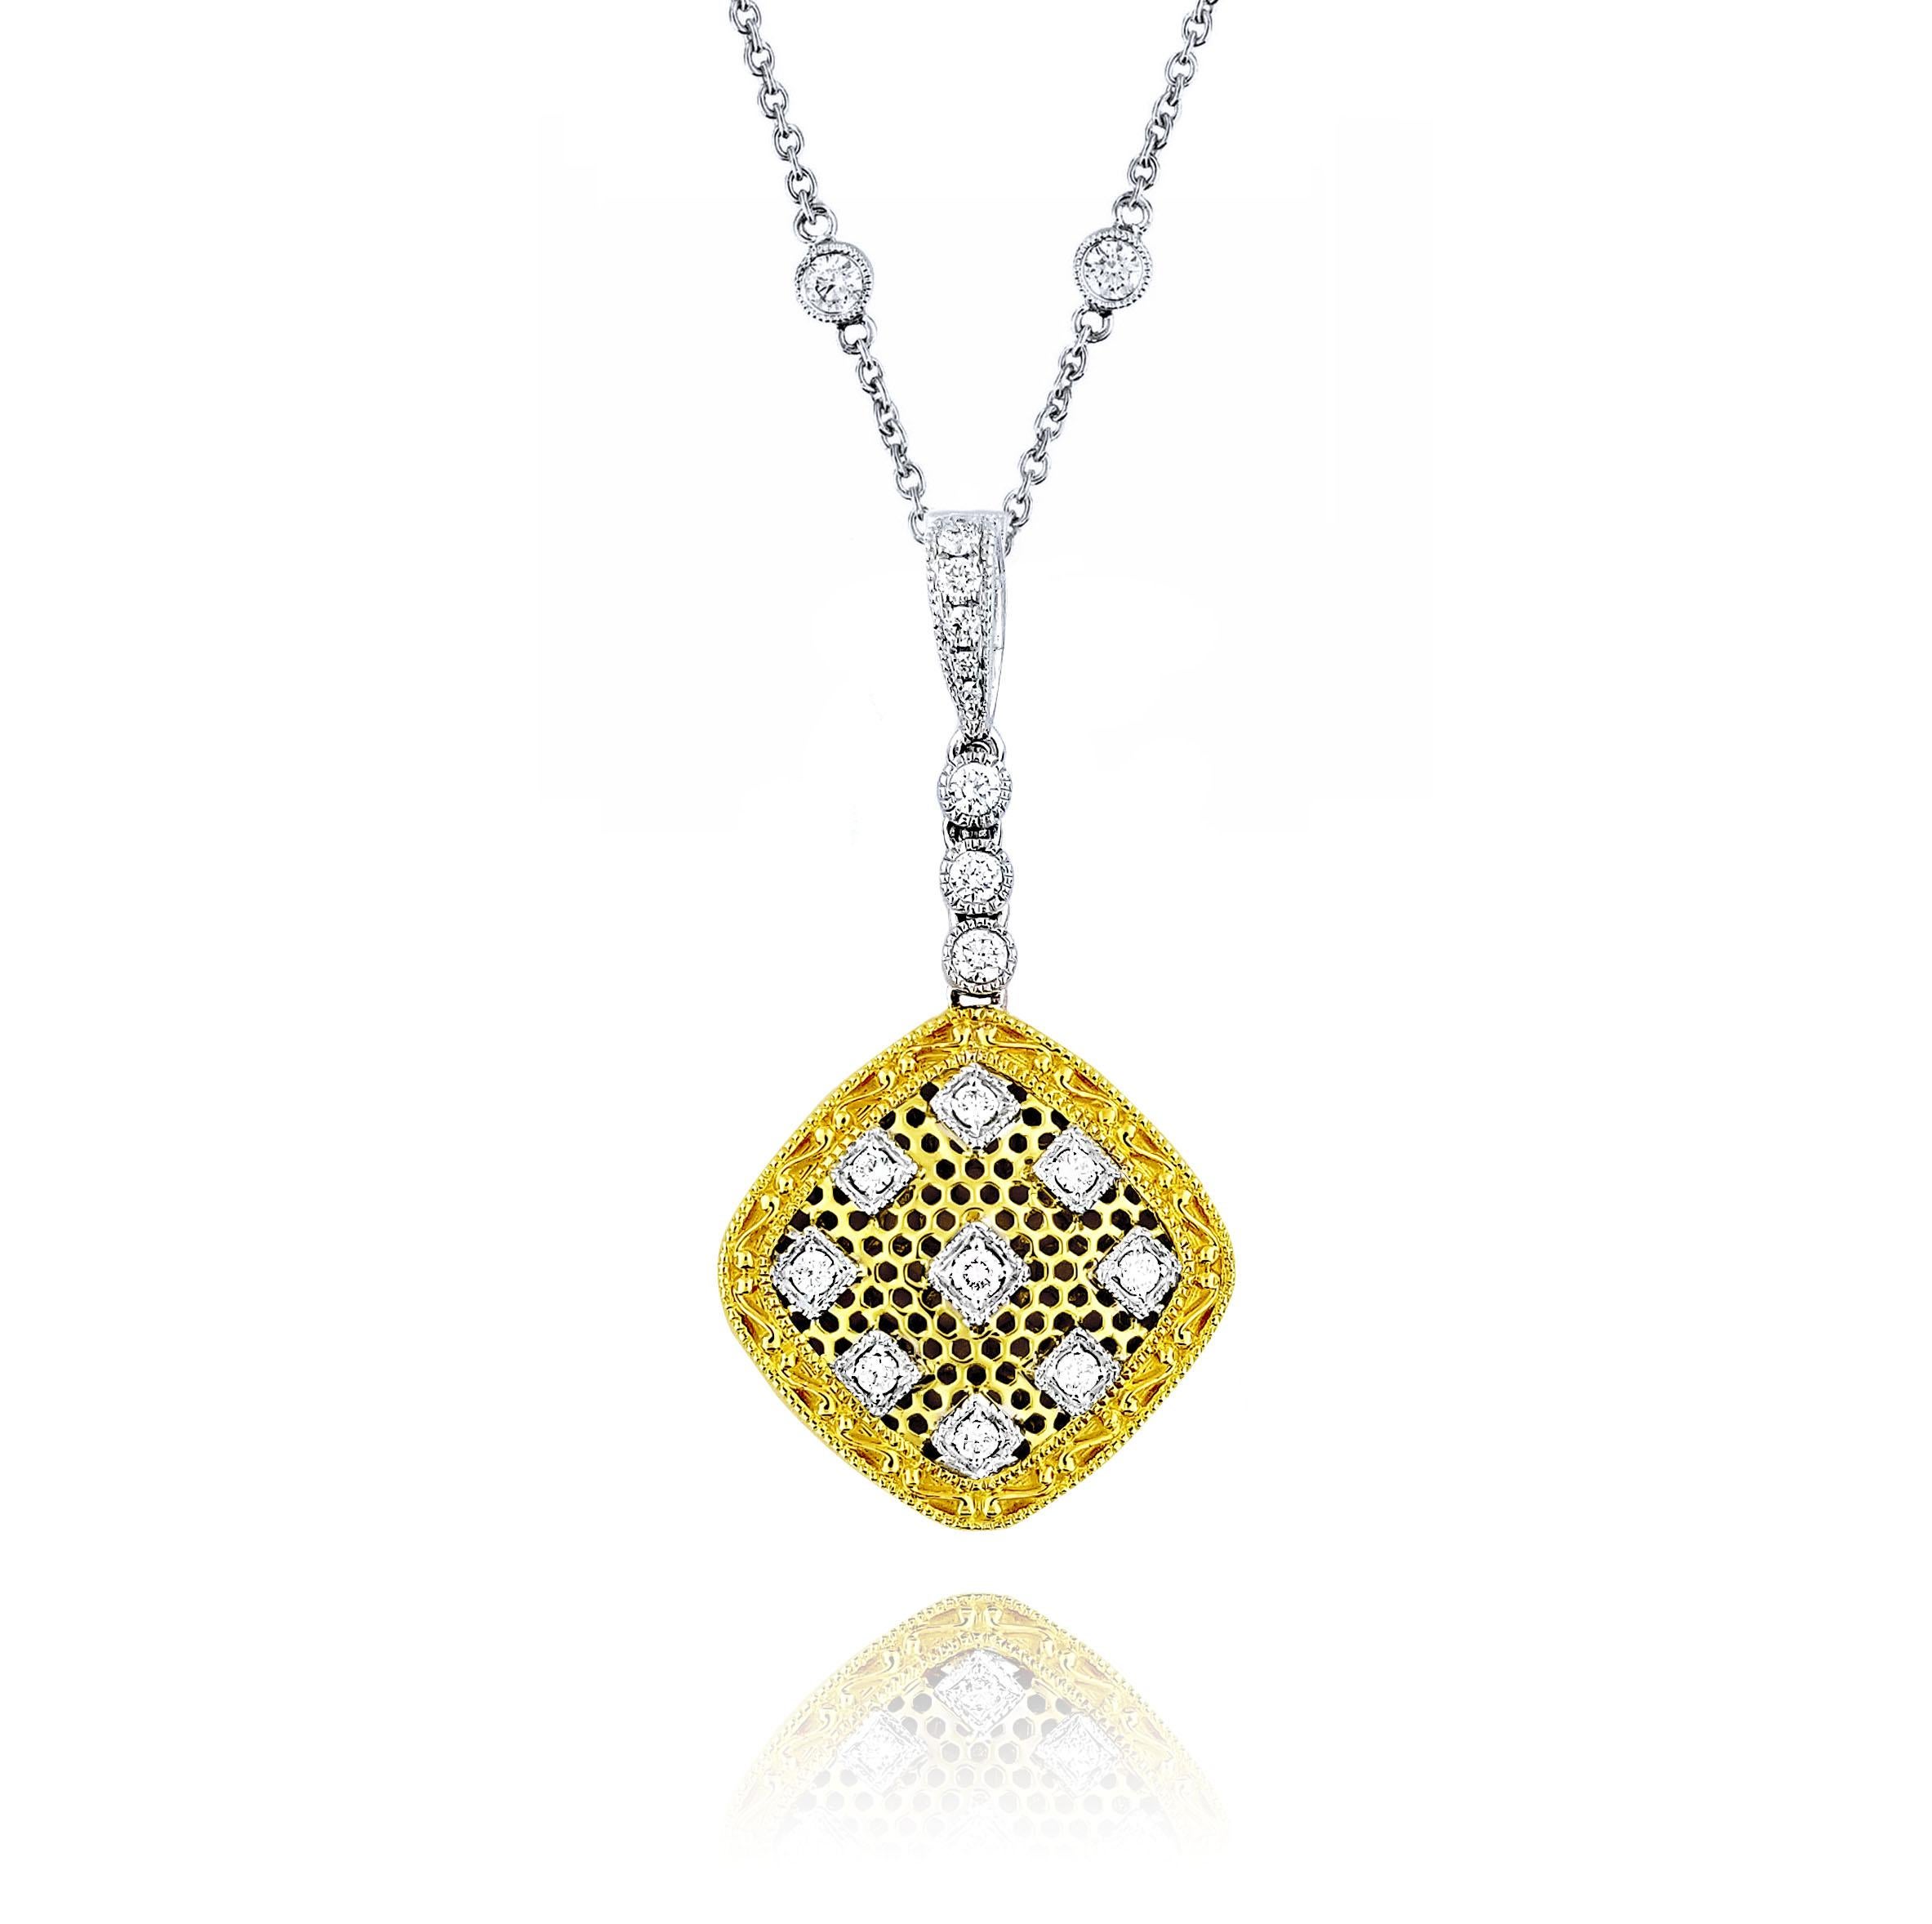 Produced by award winning Italian designer Stefano Vitolo. Stefano creates custom artisanal one of a kind jewelry with excellent gemstones in a truly old world Italian craftmanship.

This diamond pendant has 0.26 total carat weight of F/G color and